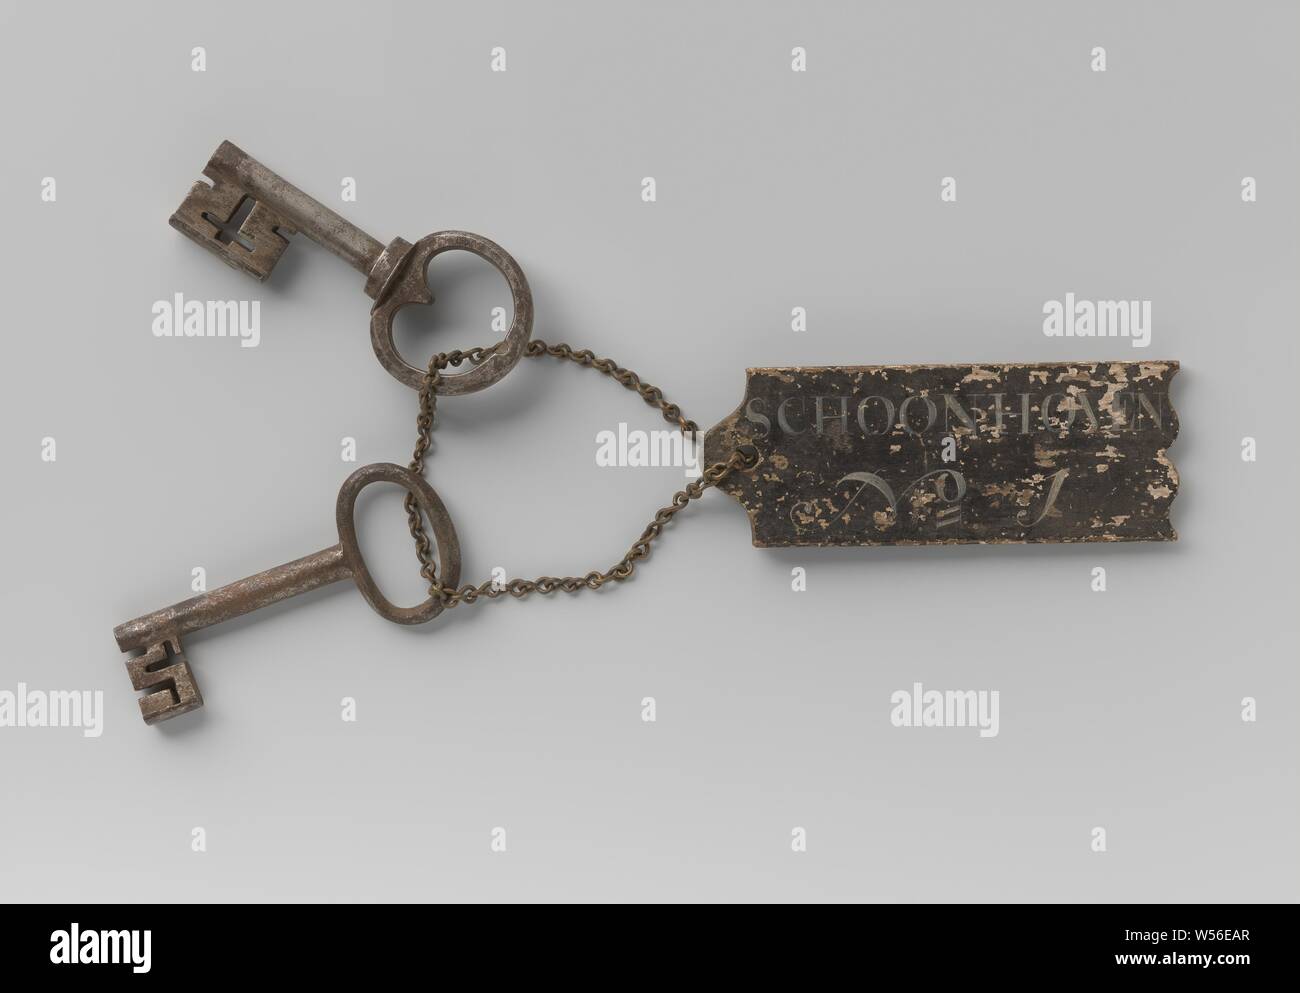 Keys, Some 19 keys, probably from the recipient general, having served to  open the cash boxes of the special recipients. Tied to boards (labels) with  the names of Schoonhoven No 1 with